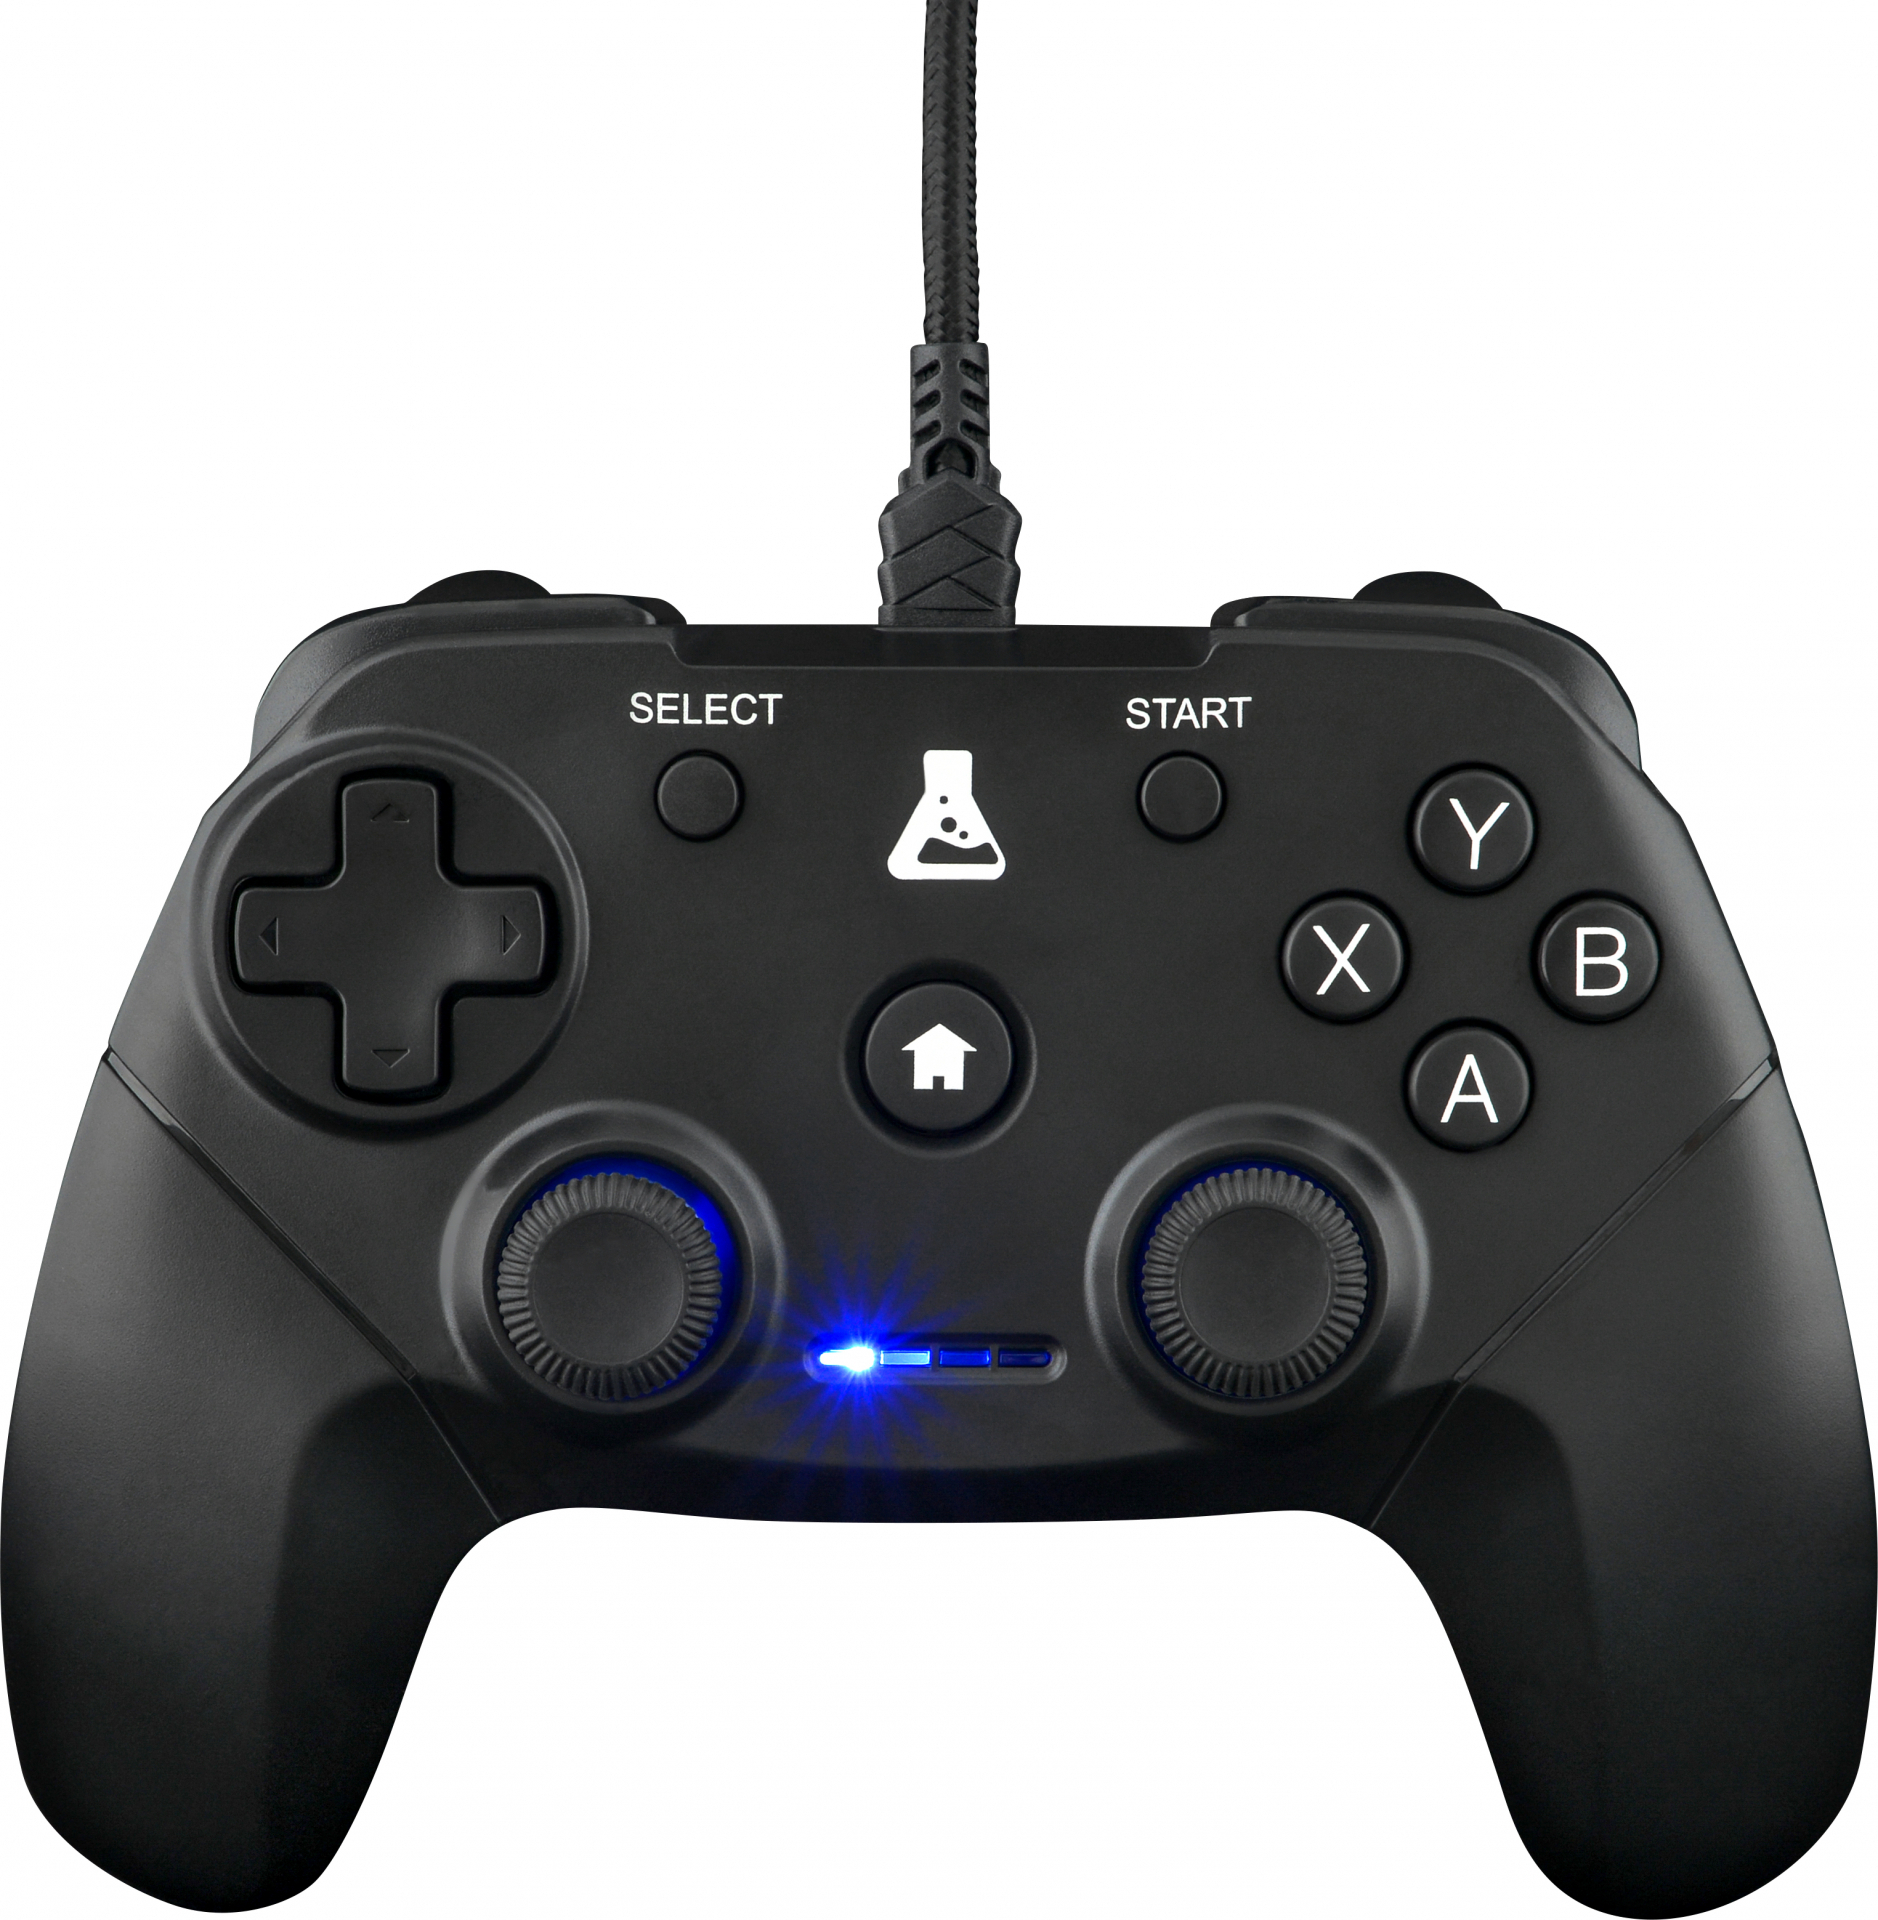 THE G-LAB K-Pad Thorium Wired Gaming Controller